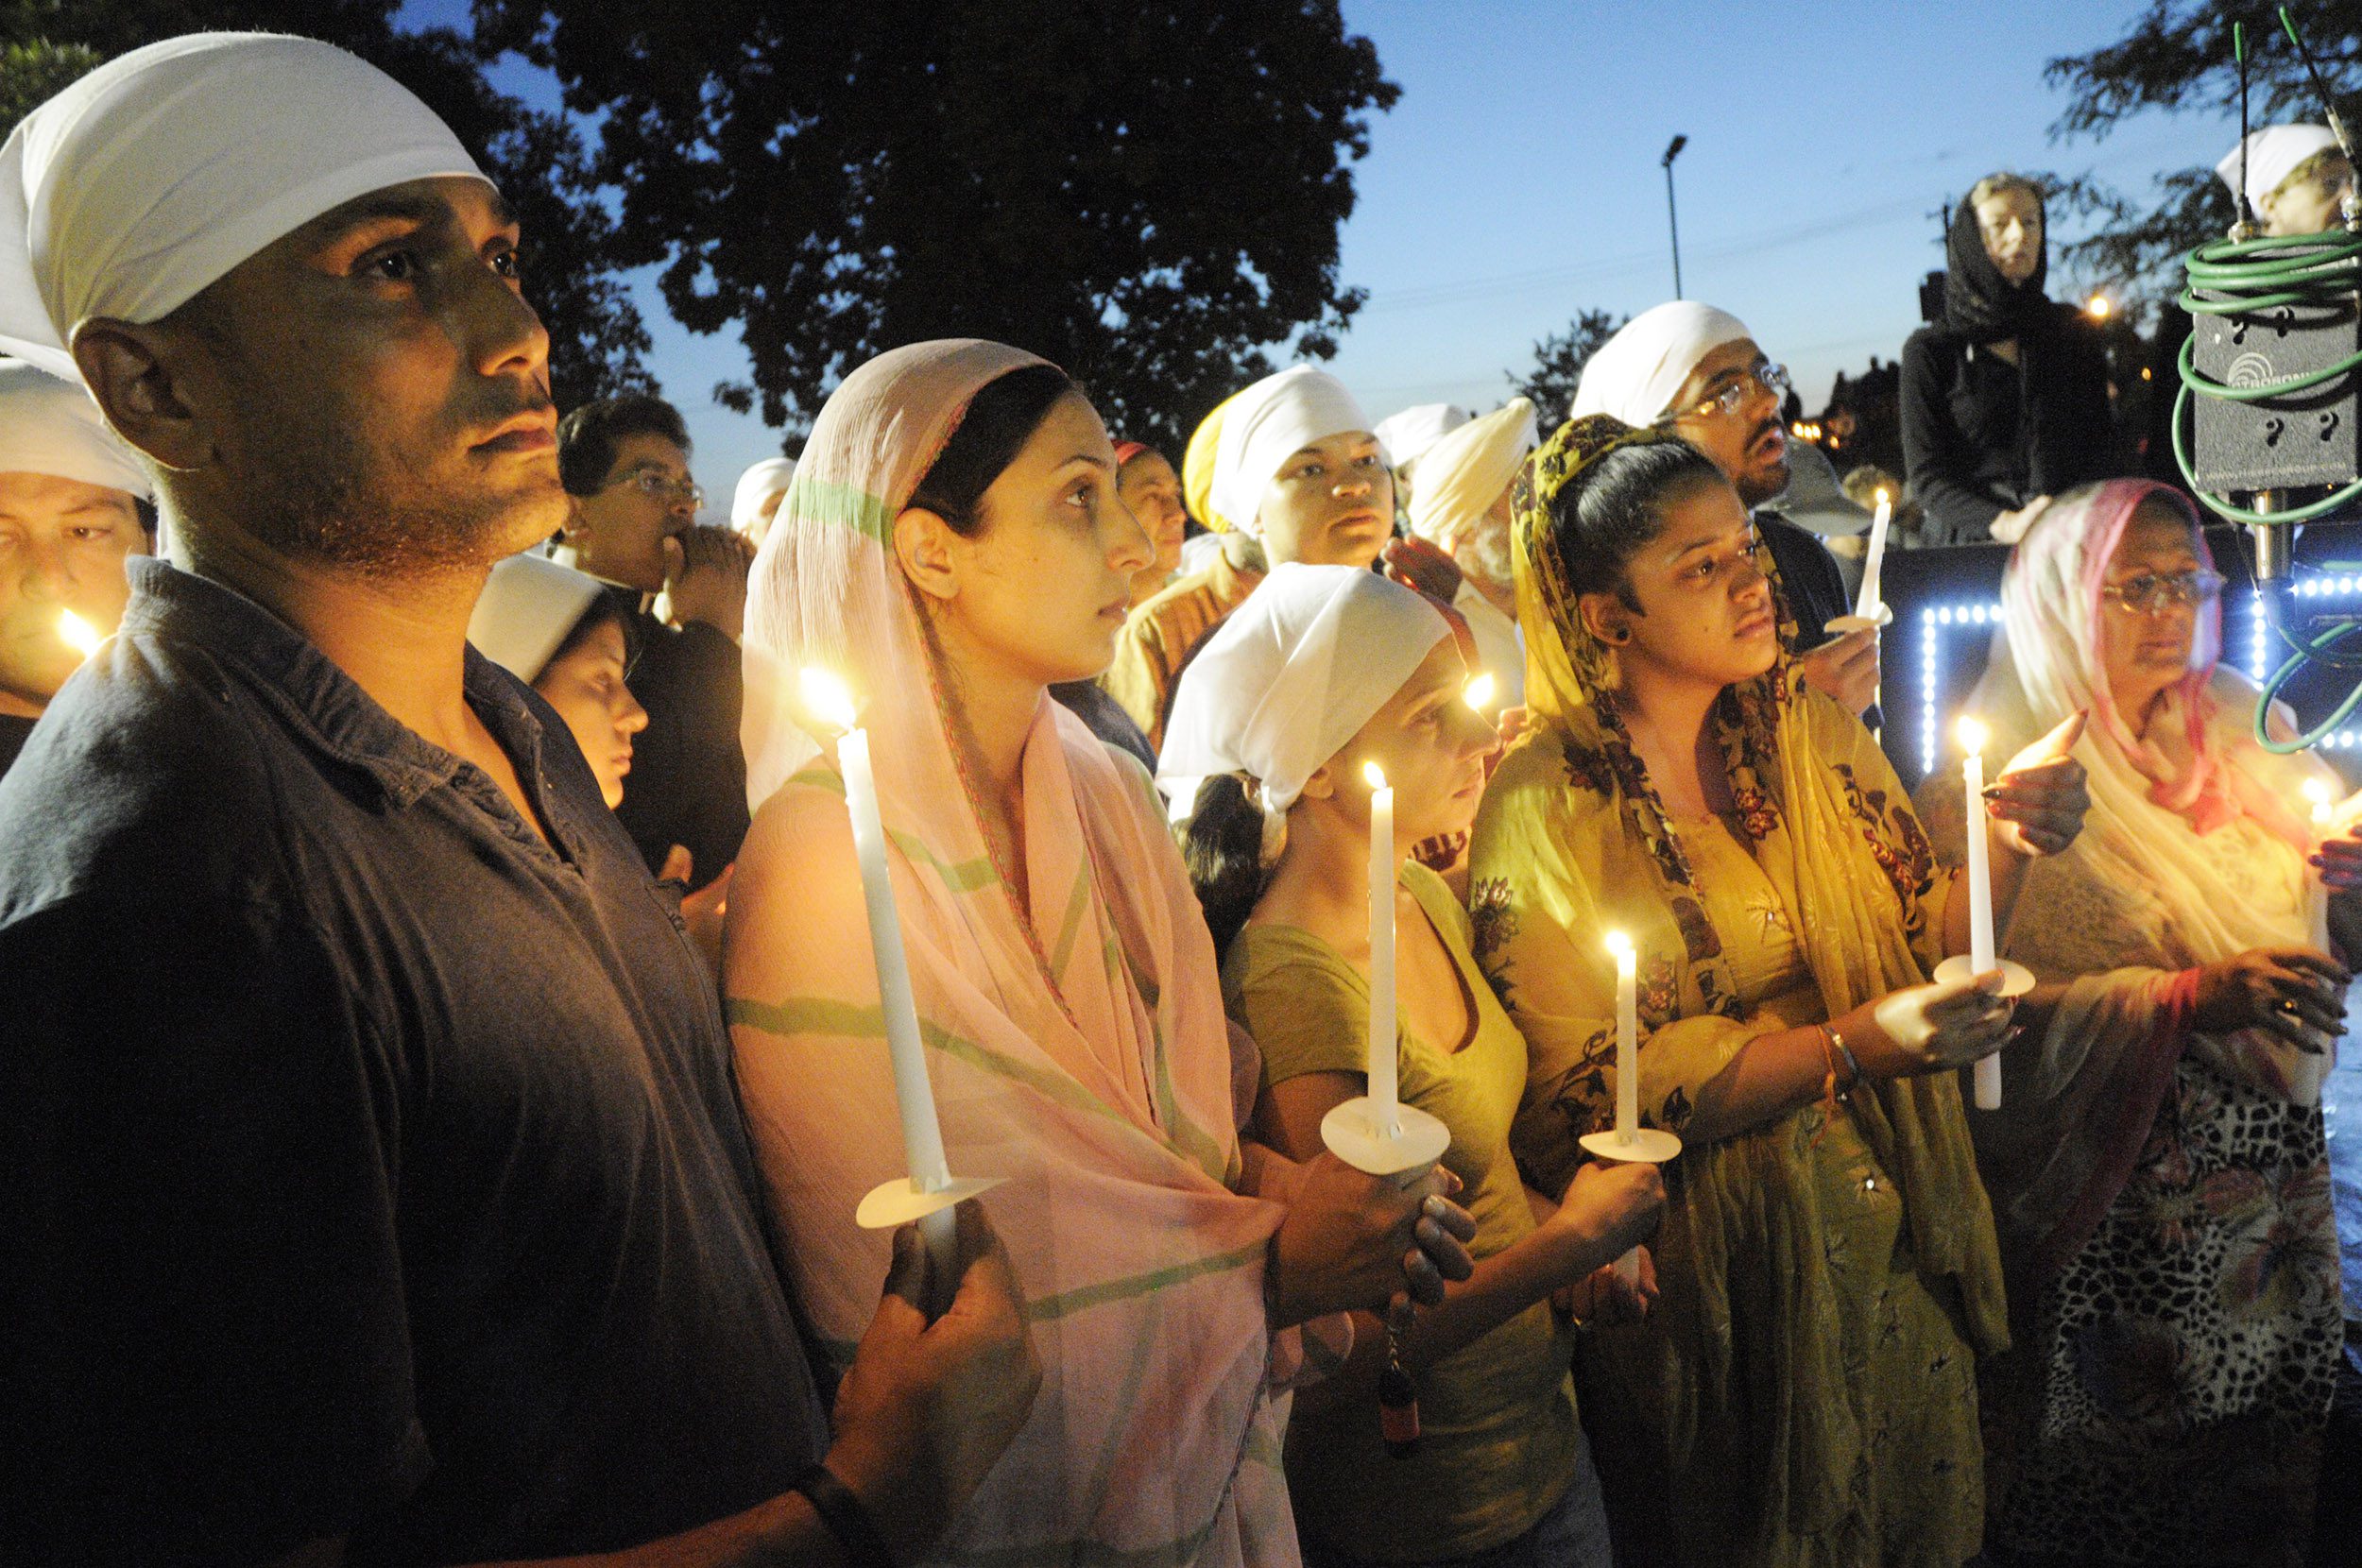 Pardeep Kaleka, far left, his wife Jaspreet Kaleka and other family members at the Oak Creek vigil for victims of the Sikh Temple shootings. Pardeep's father Satwant, was killed in the shooting. Photo by Ernie Mastroianni photo, courtesy of Sikh Coalition